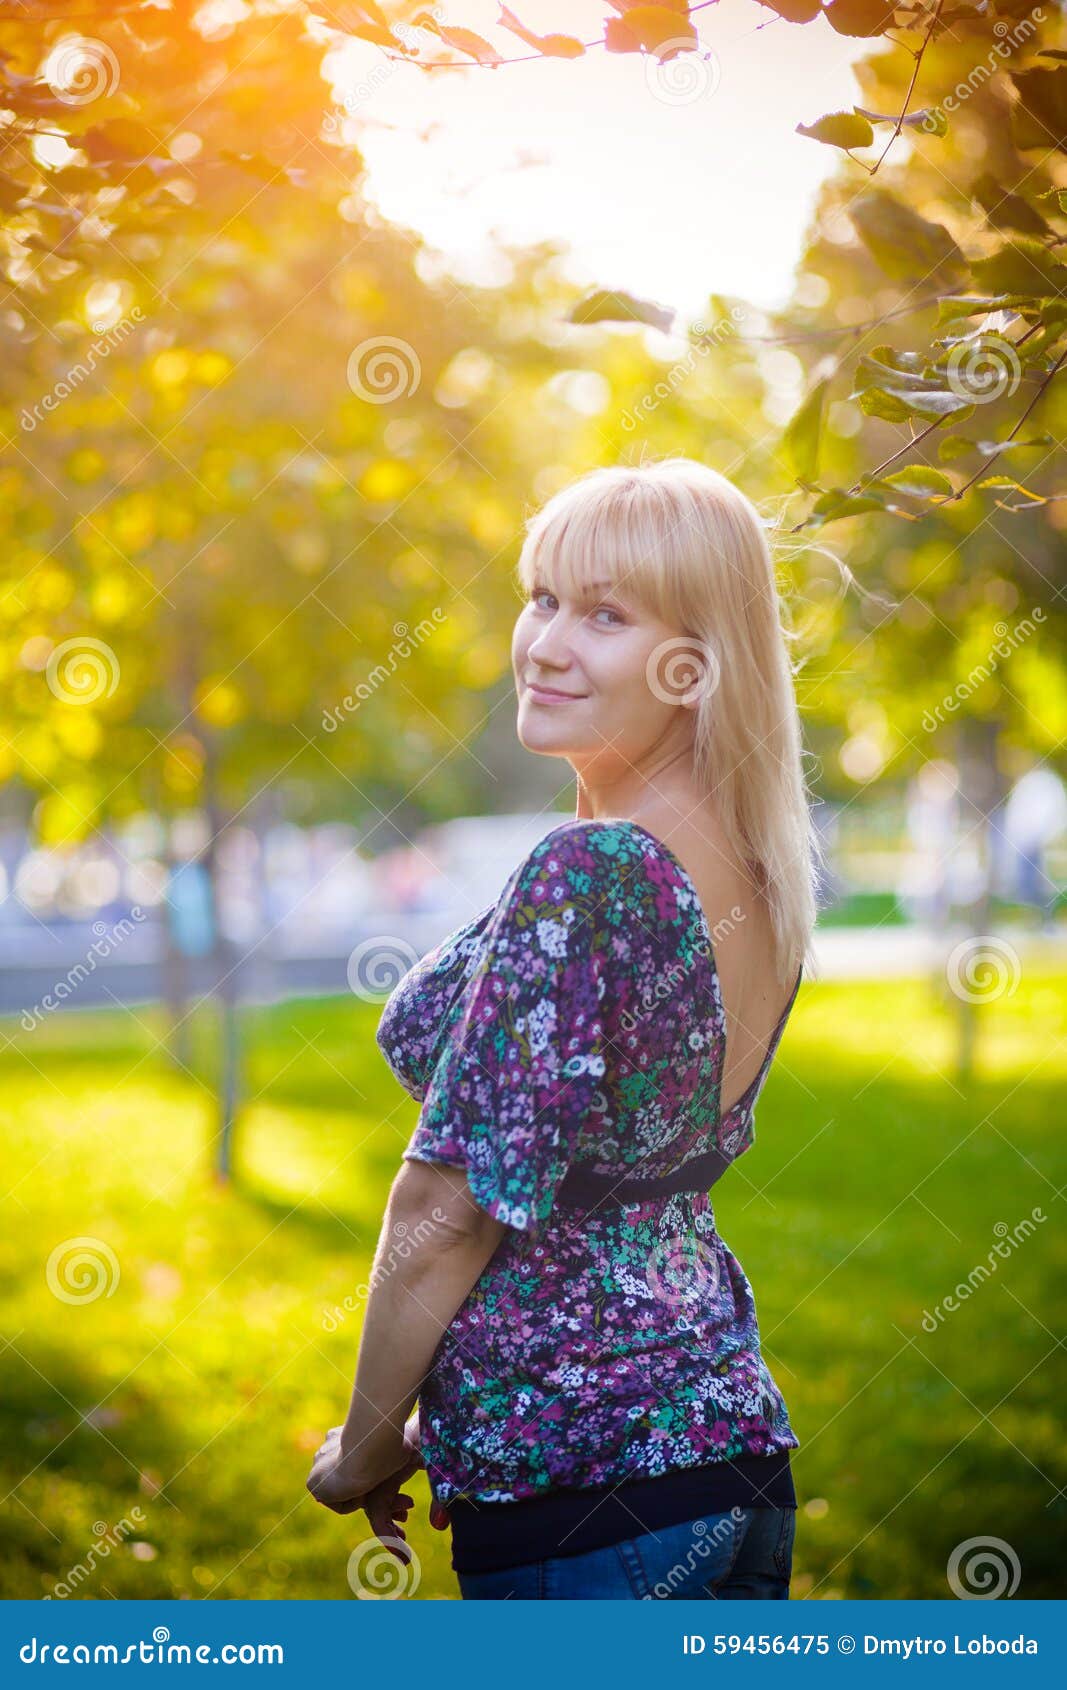 Portrait of woman in park stock image. Image of person - 59456475